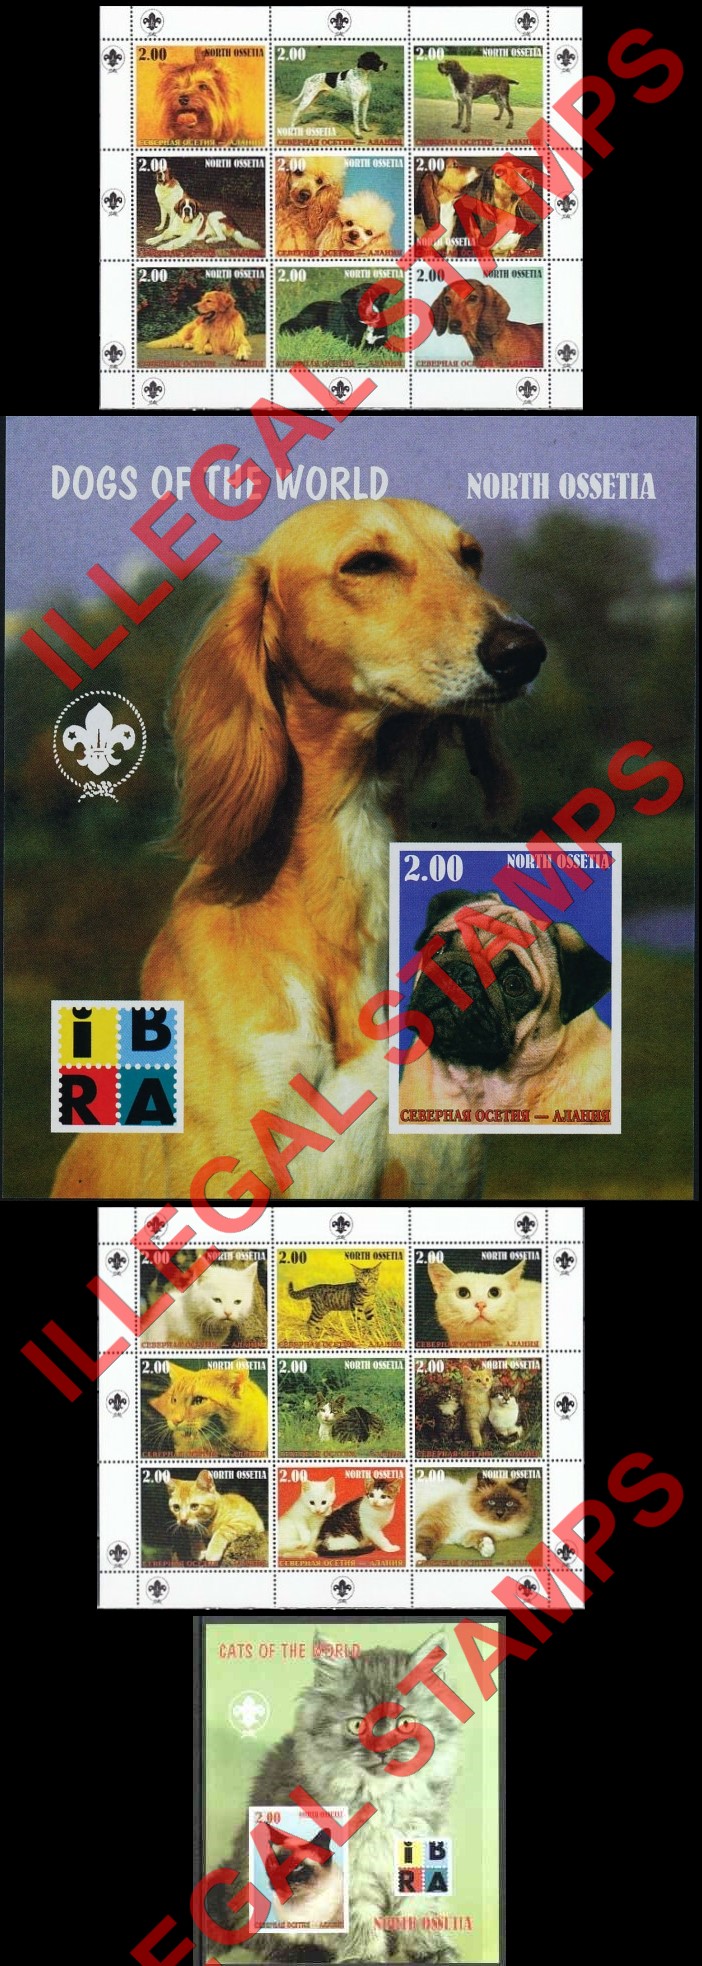 North Ossetia 1999 Counterfeit Illegal Stamps (Part 2)